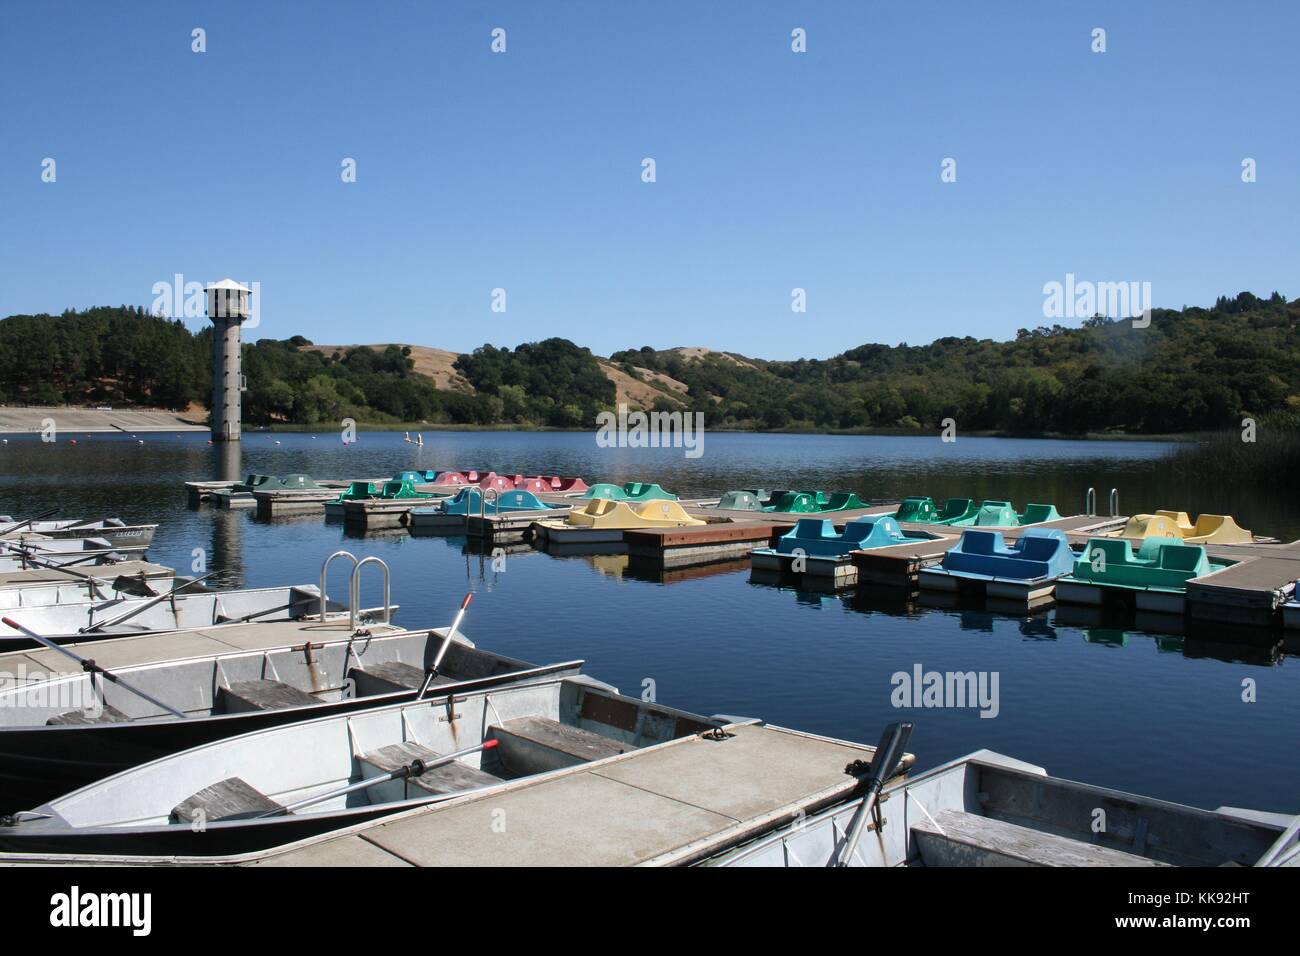 A photograph of docked rowboats and pedal boats at the Layfayette Reservoir, the reservoir is surrounded by nature areas open to the public, the photo was taken during a time where the water levels in the reservoir were low due to a long running drought, Contra Costa County, California, 2014. Stock Photo